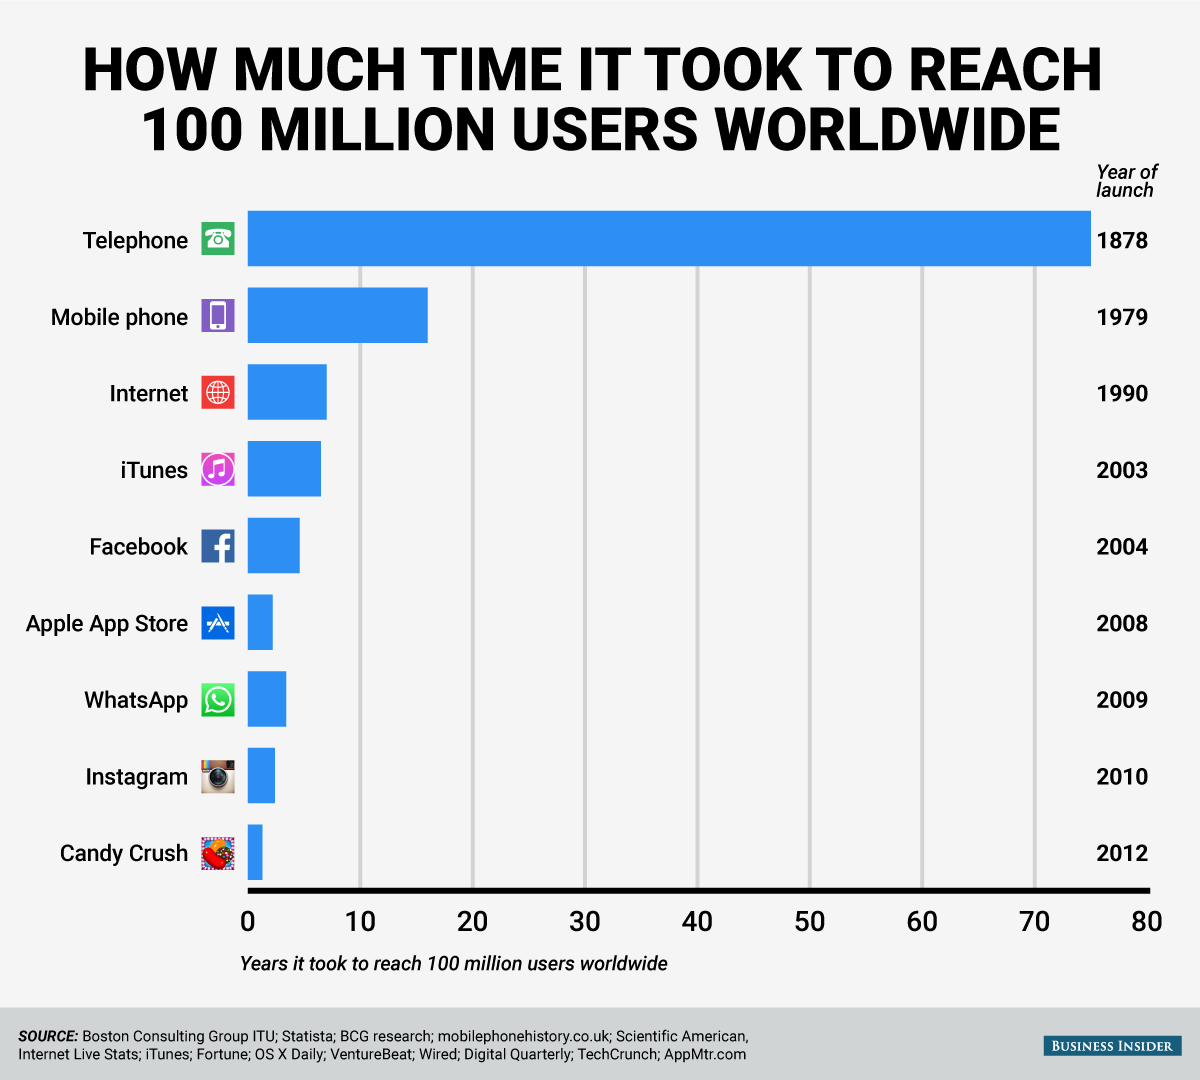 How much time it took to reach 100Million users worldwide